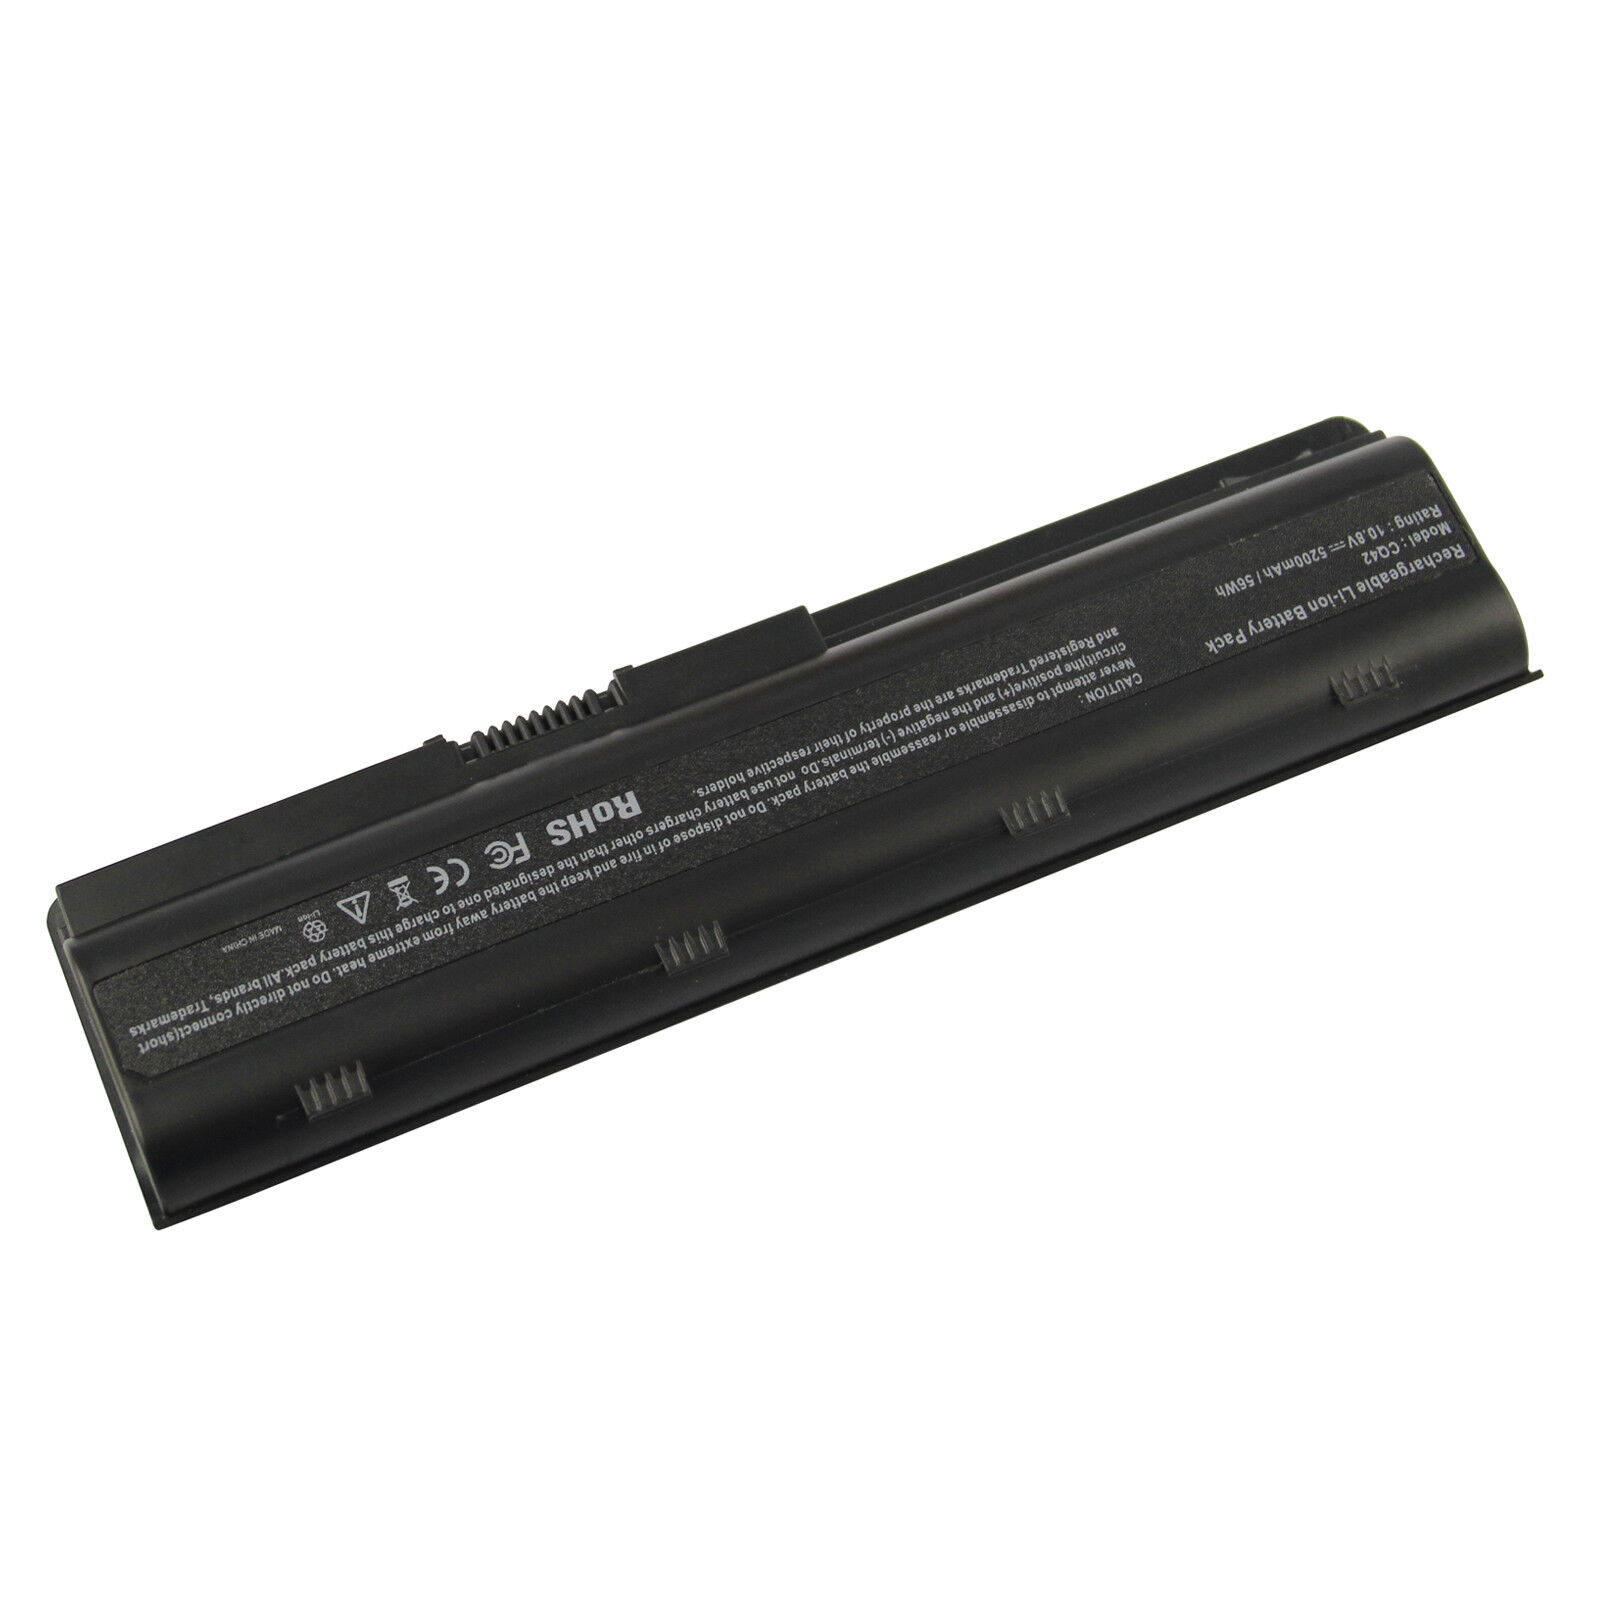 for HP MU06 MU09 SPARE 593554-001 593553-001 DM4 Notebook Laptop Battery/Charger